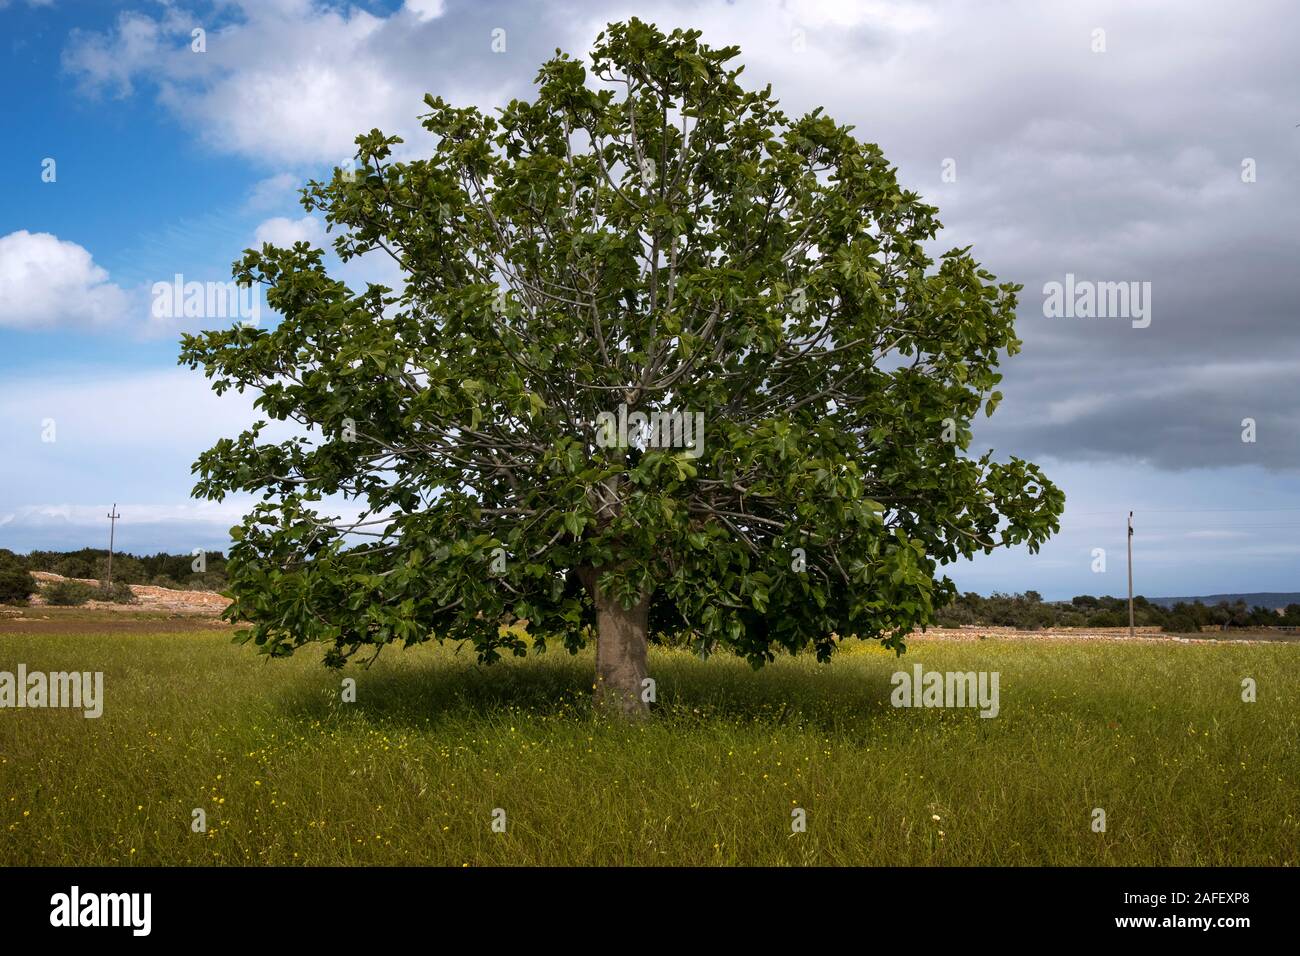 A common fig tree (Ficus carica) in a field in Formentera countryside in spring (Pityusic Islands, Balearic Islands, Spain) Stock Photo